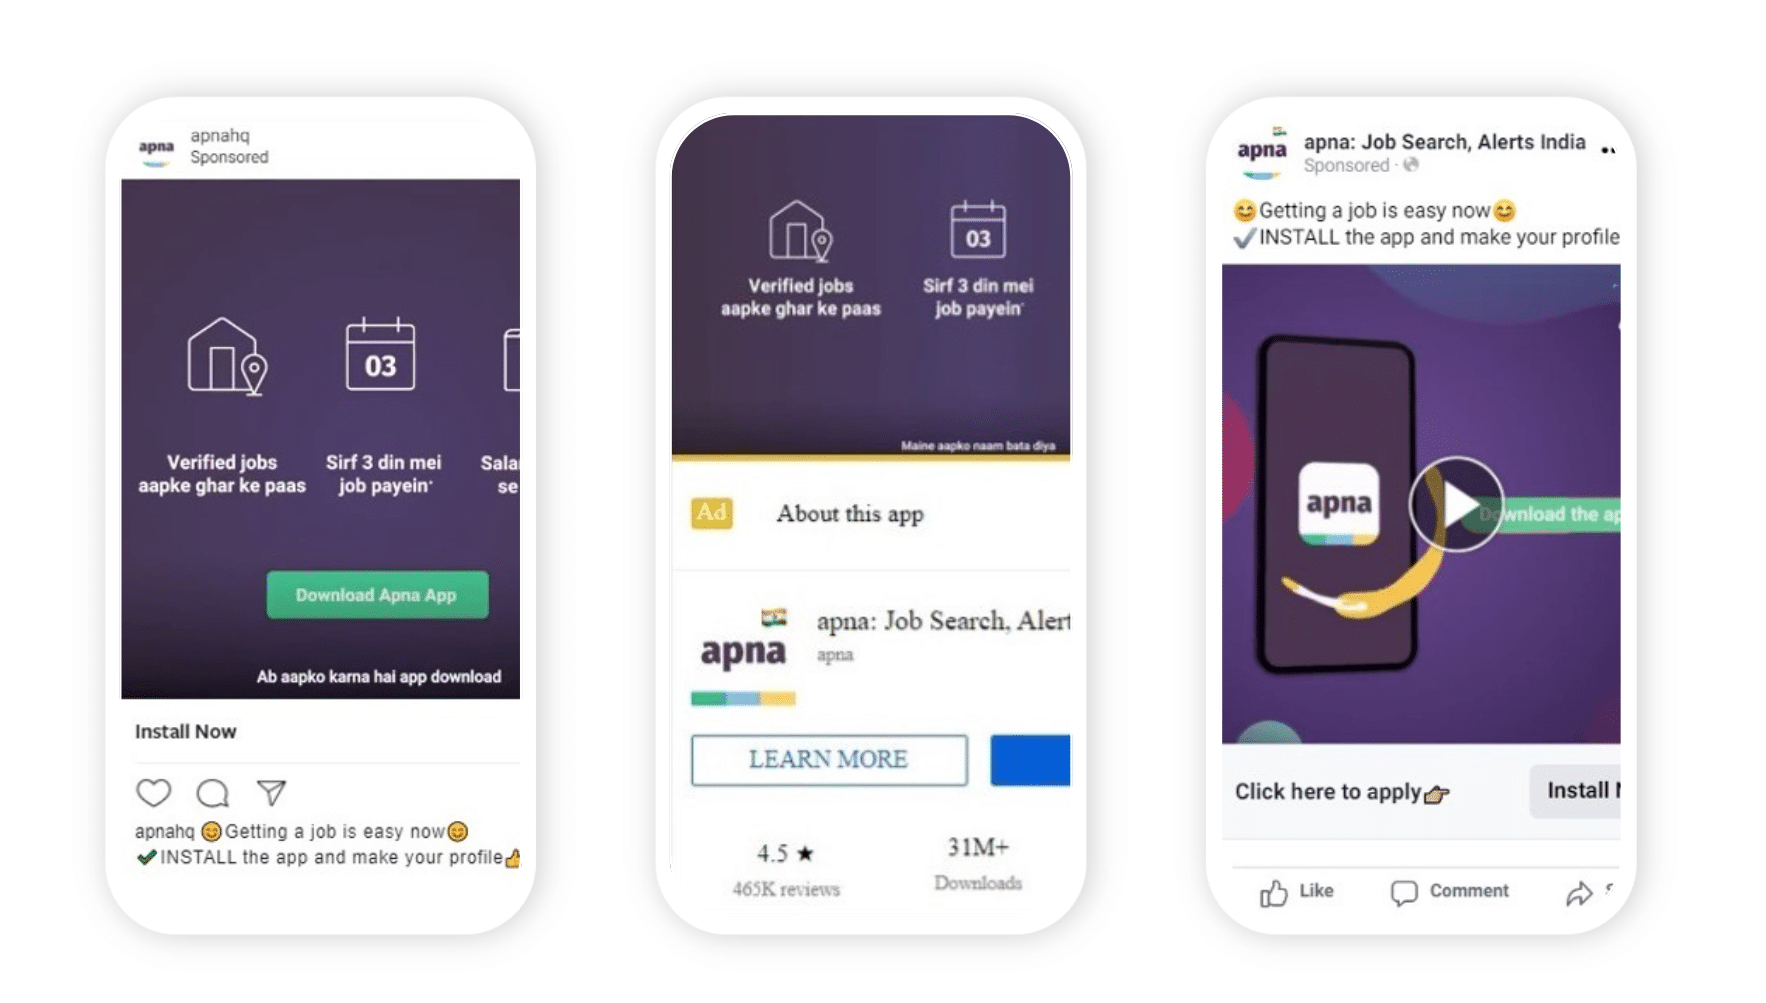 Three images showing various Apna ads on social media networks:
Image 1: Instagram ad with a CTA to download the Apna app
Image 2: YouTube ad with a CTA to Install the Apna app from the Google Play Store
Image 3: Facebook Ad with a CTA to install the Apna app